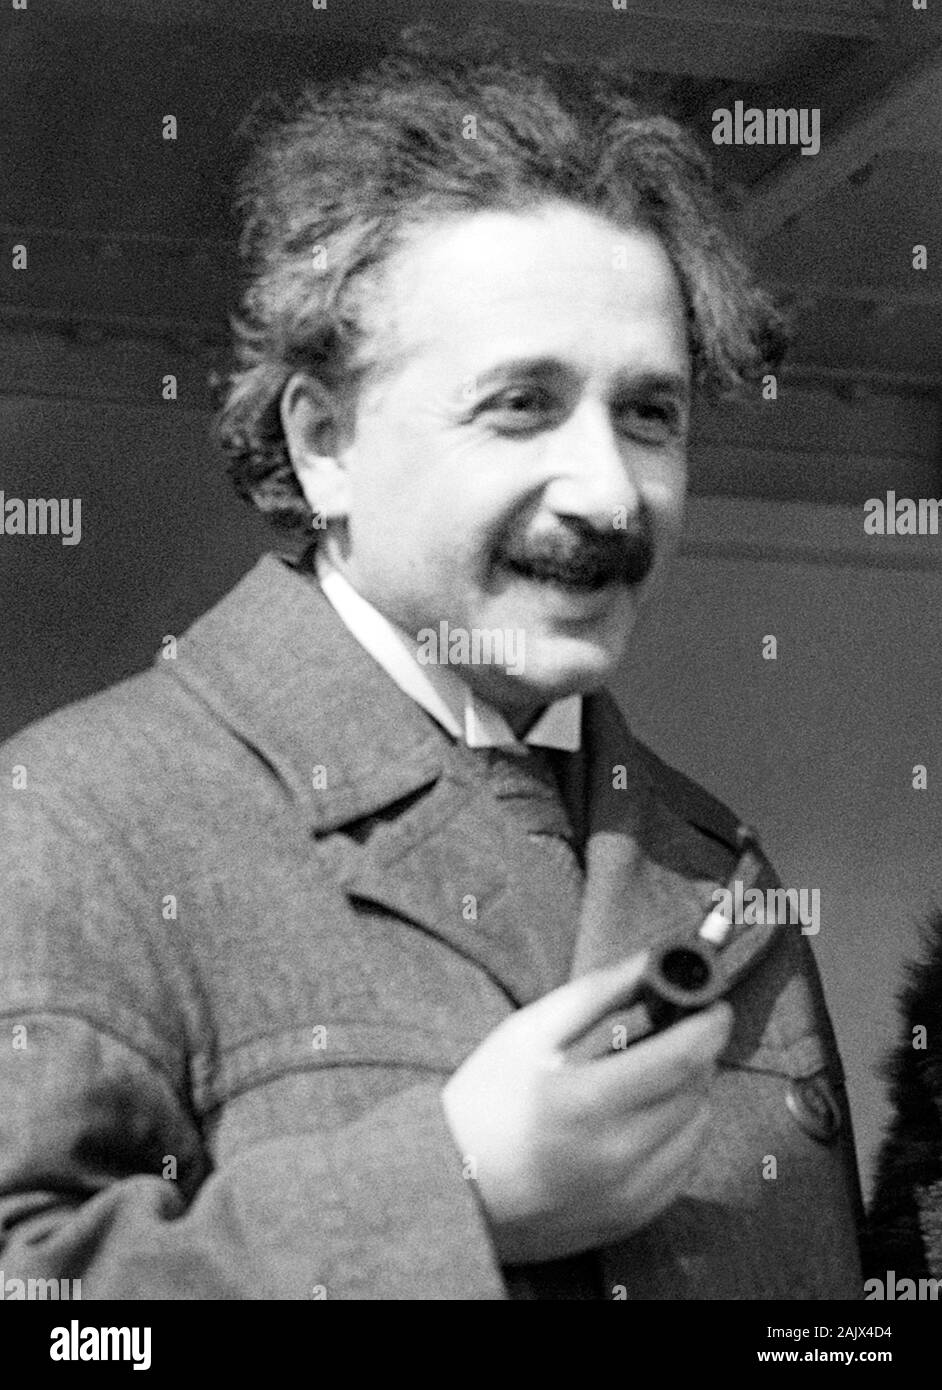 Vintage photo of theoretical physicist Albert Einstein (1879 – 1955). Photo by Bain News Service taken in April 1921 on his arrival in New York. Stock Photo